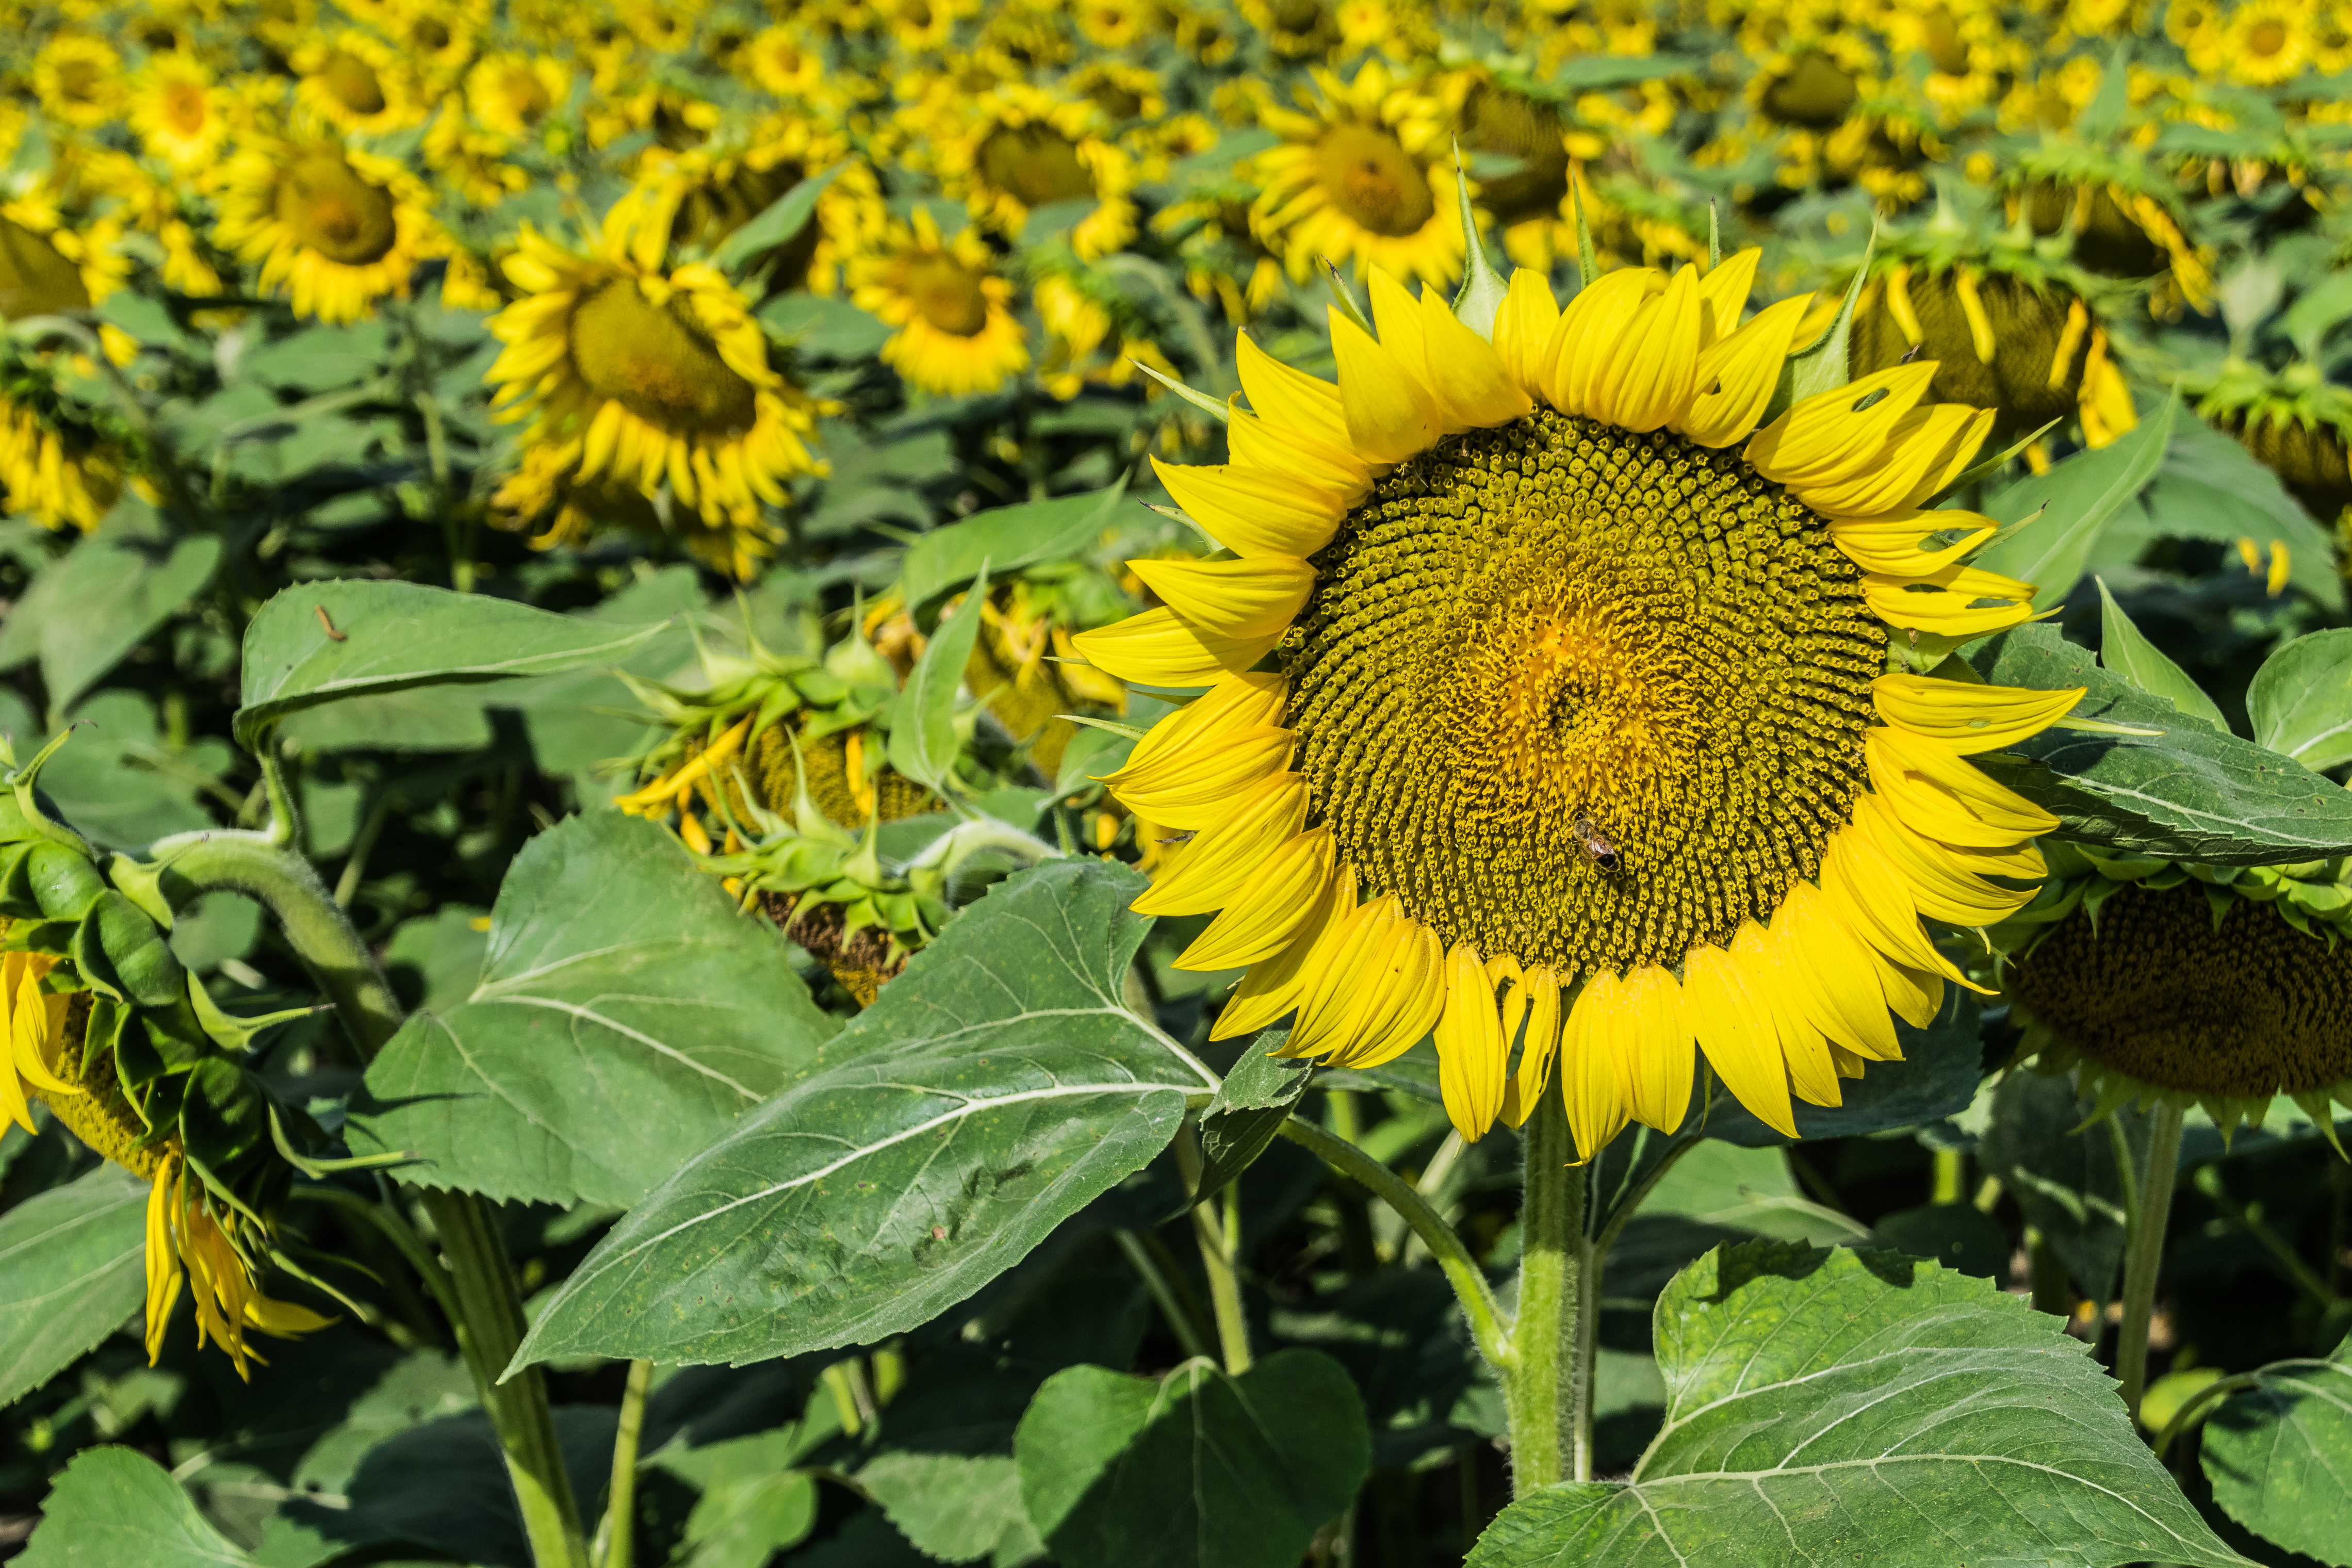 Sunflowers cultivated in Southern France 08